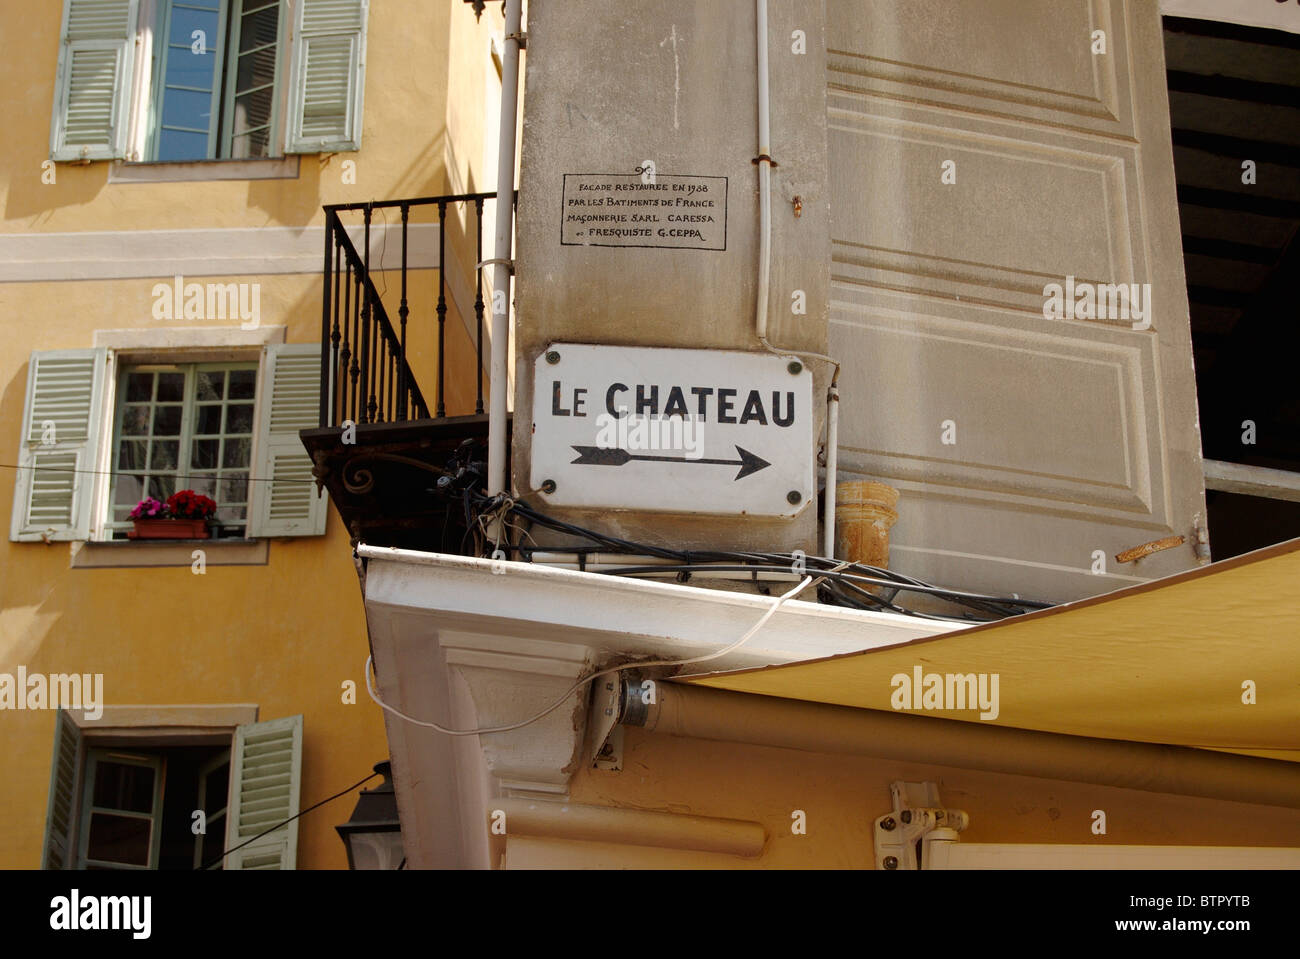 France, Nice, Place Rossetti, Arrow sign with text written outside building Stock Photo